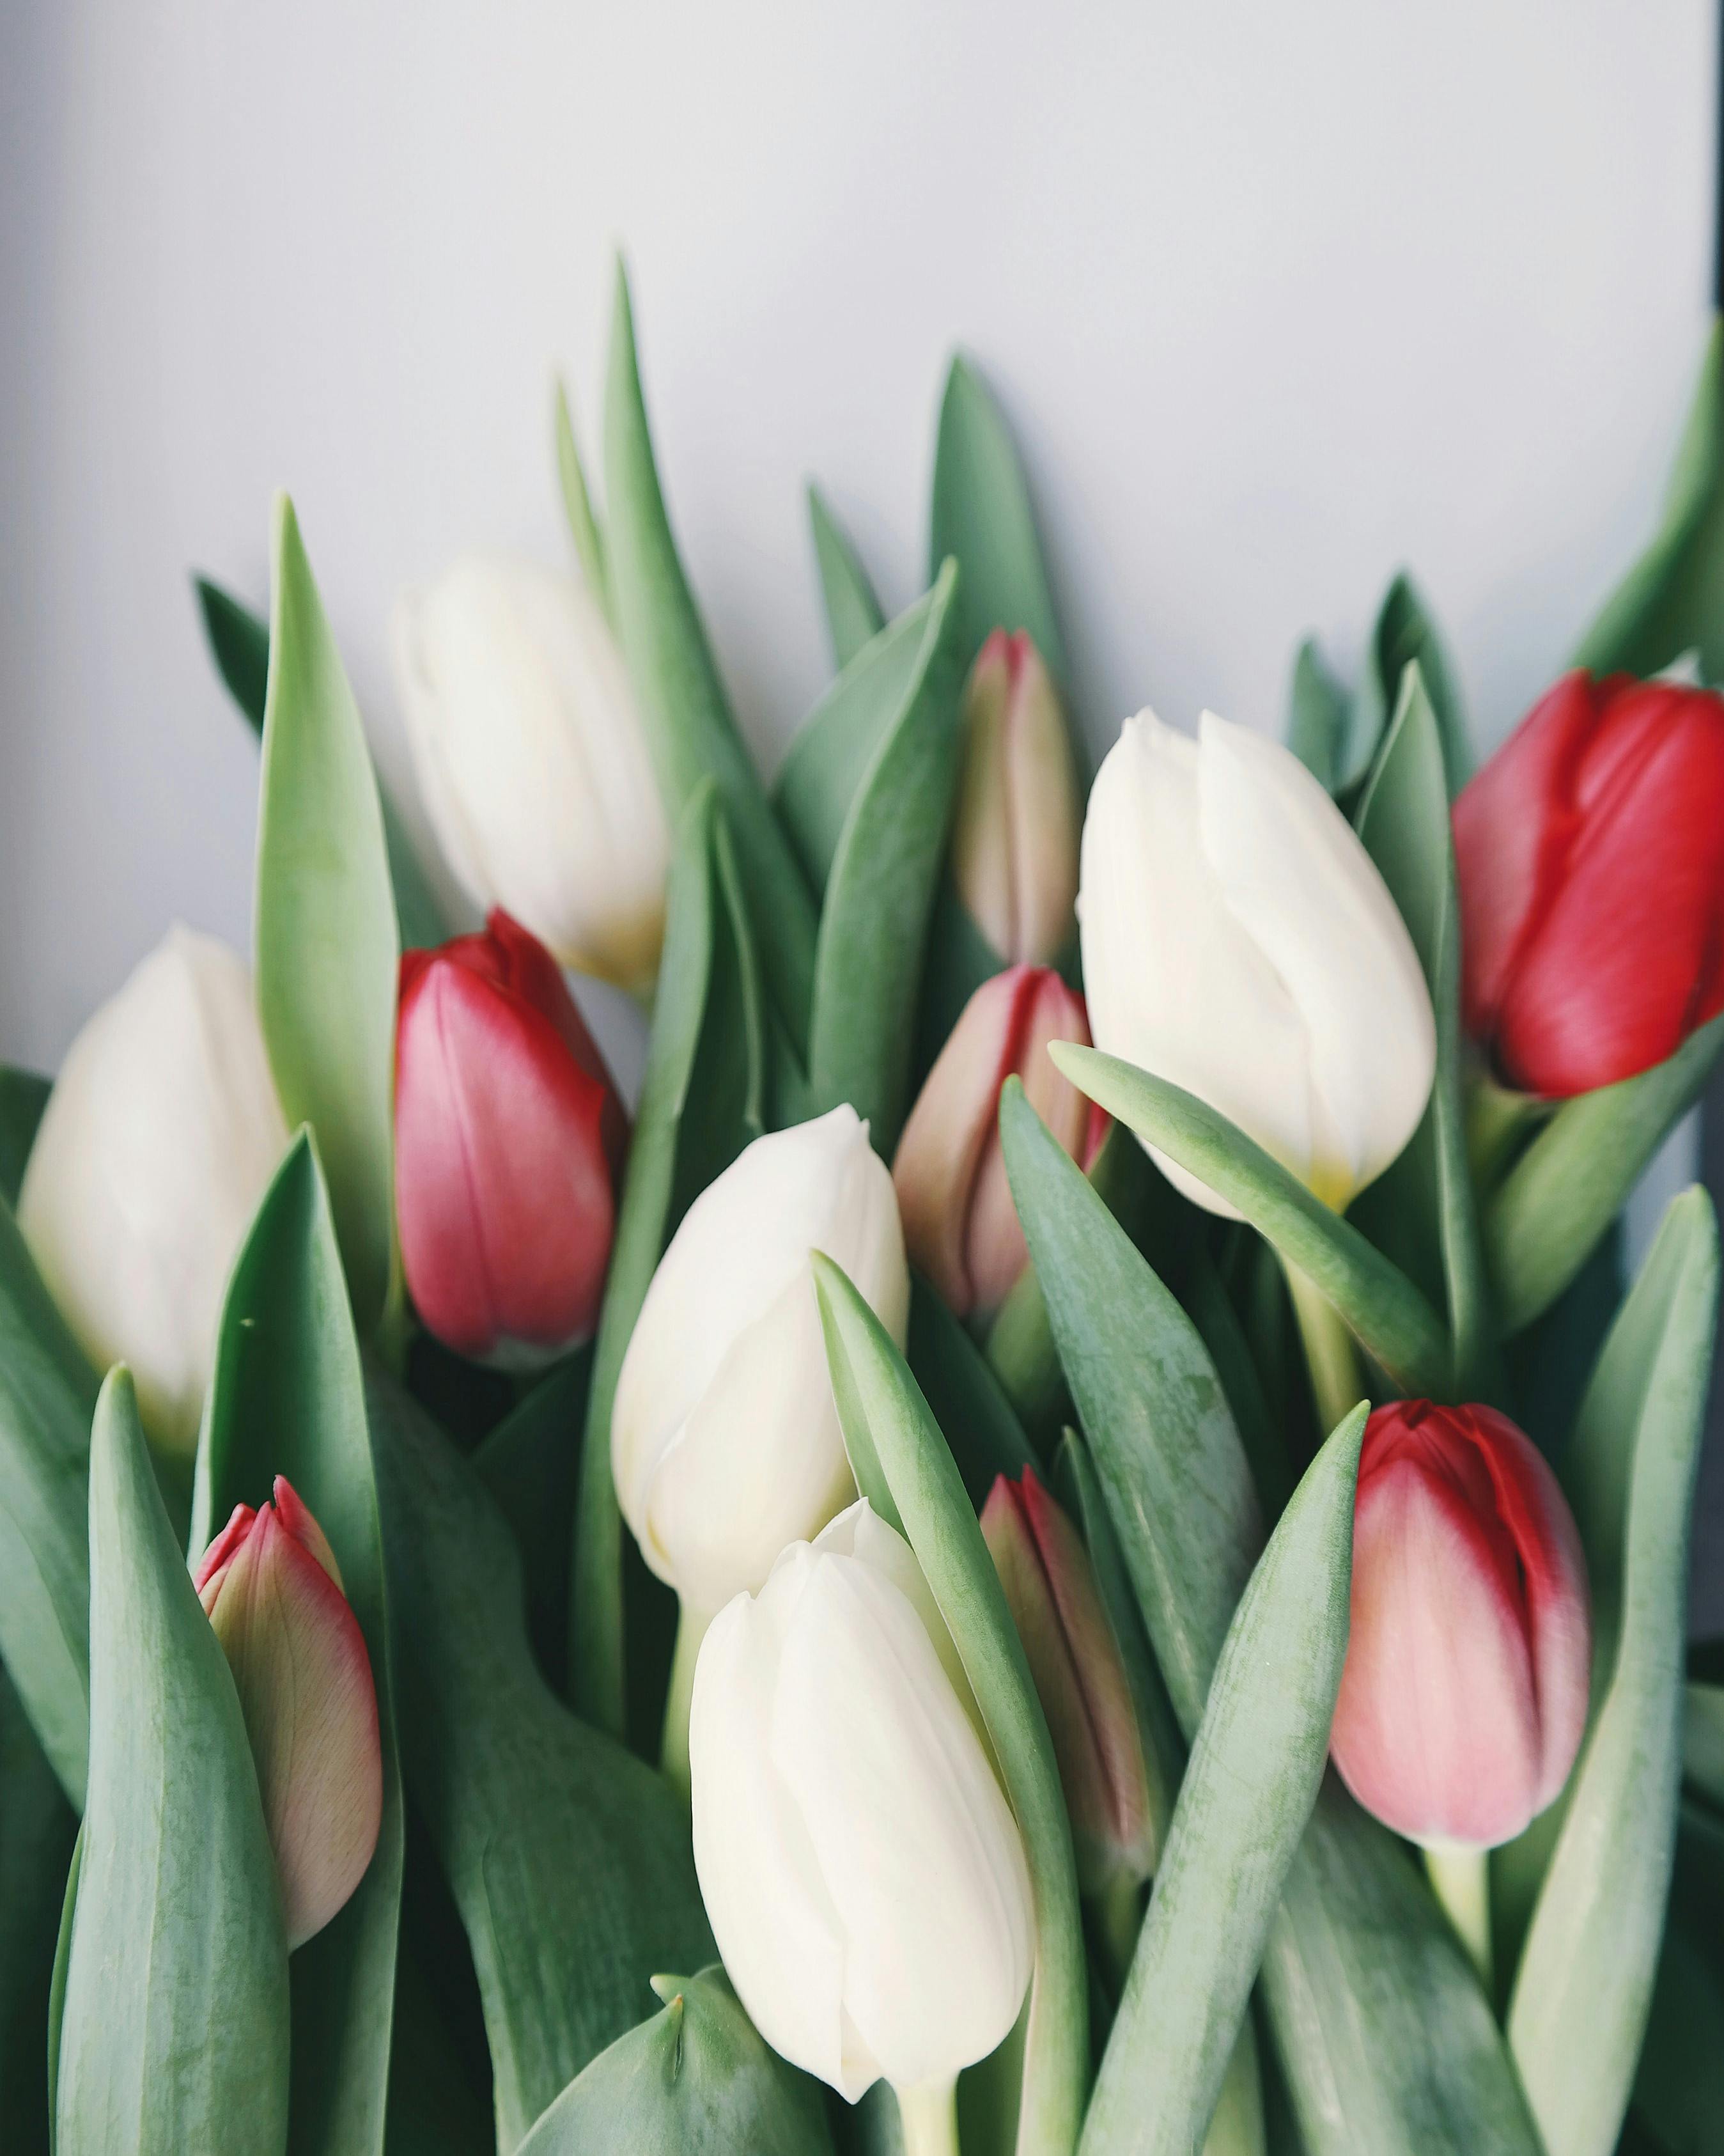 Download Tulips wallpapers for mobile phone free Tulips HD pictures